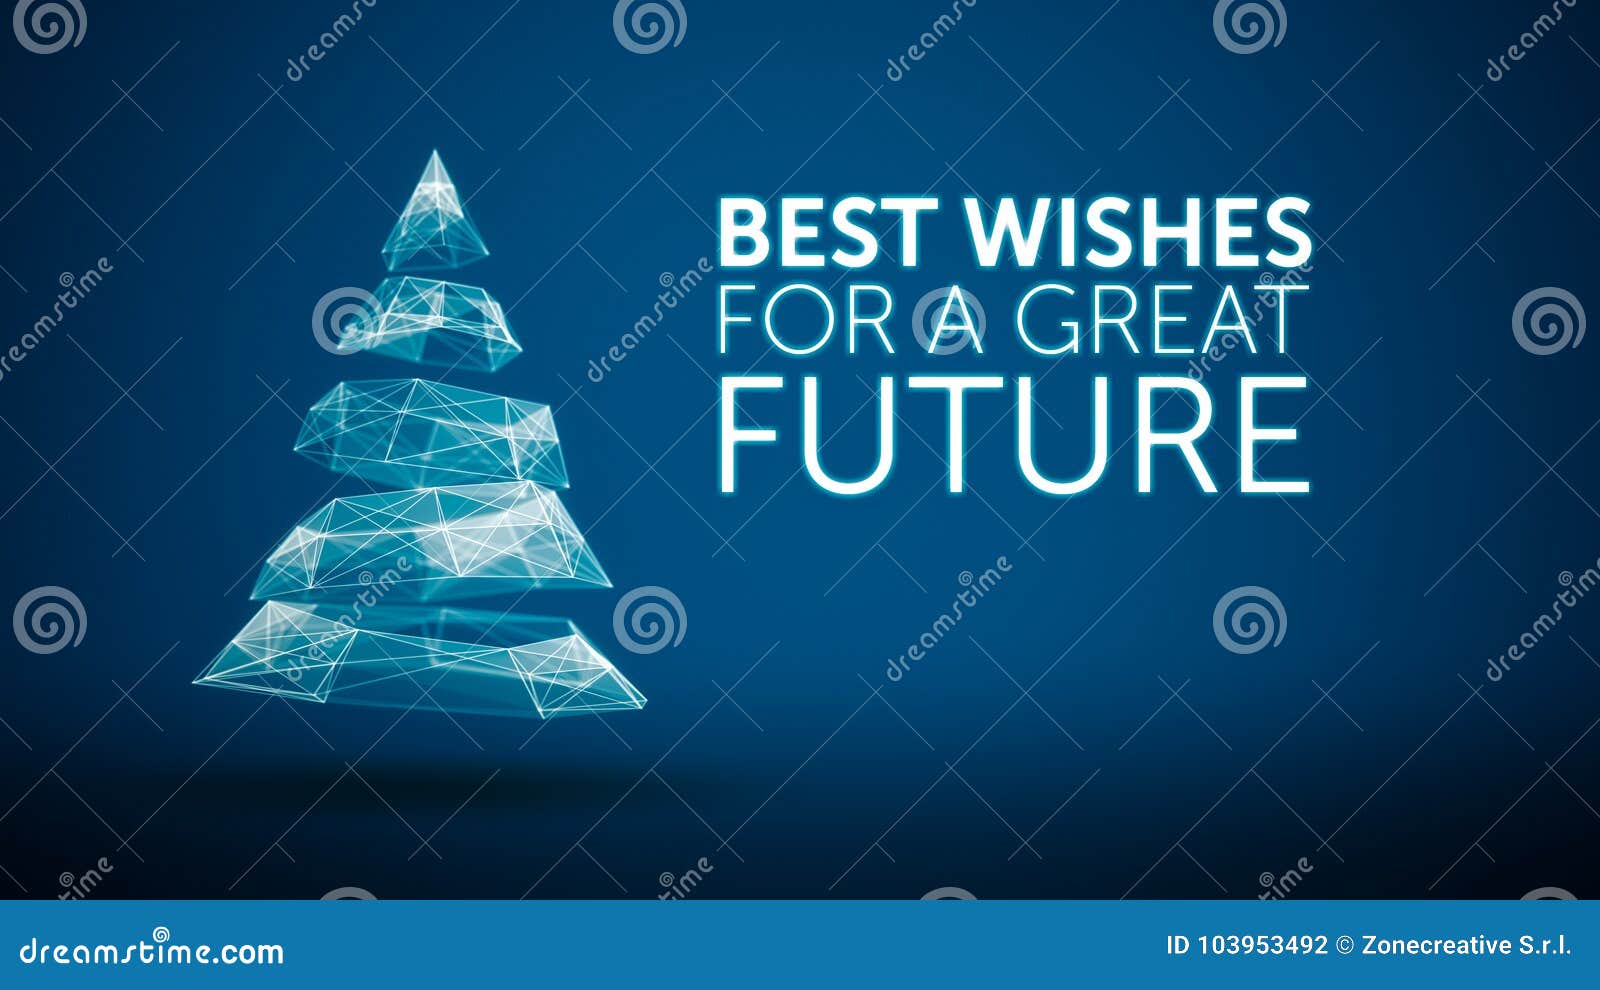 modern christmas tree and wishes great future season greetings message on blue background. elegant holiday season social